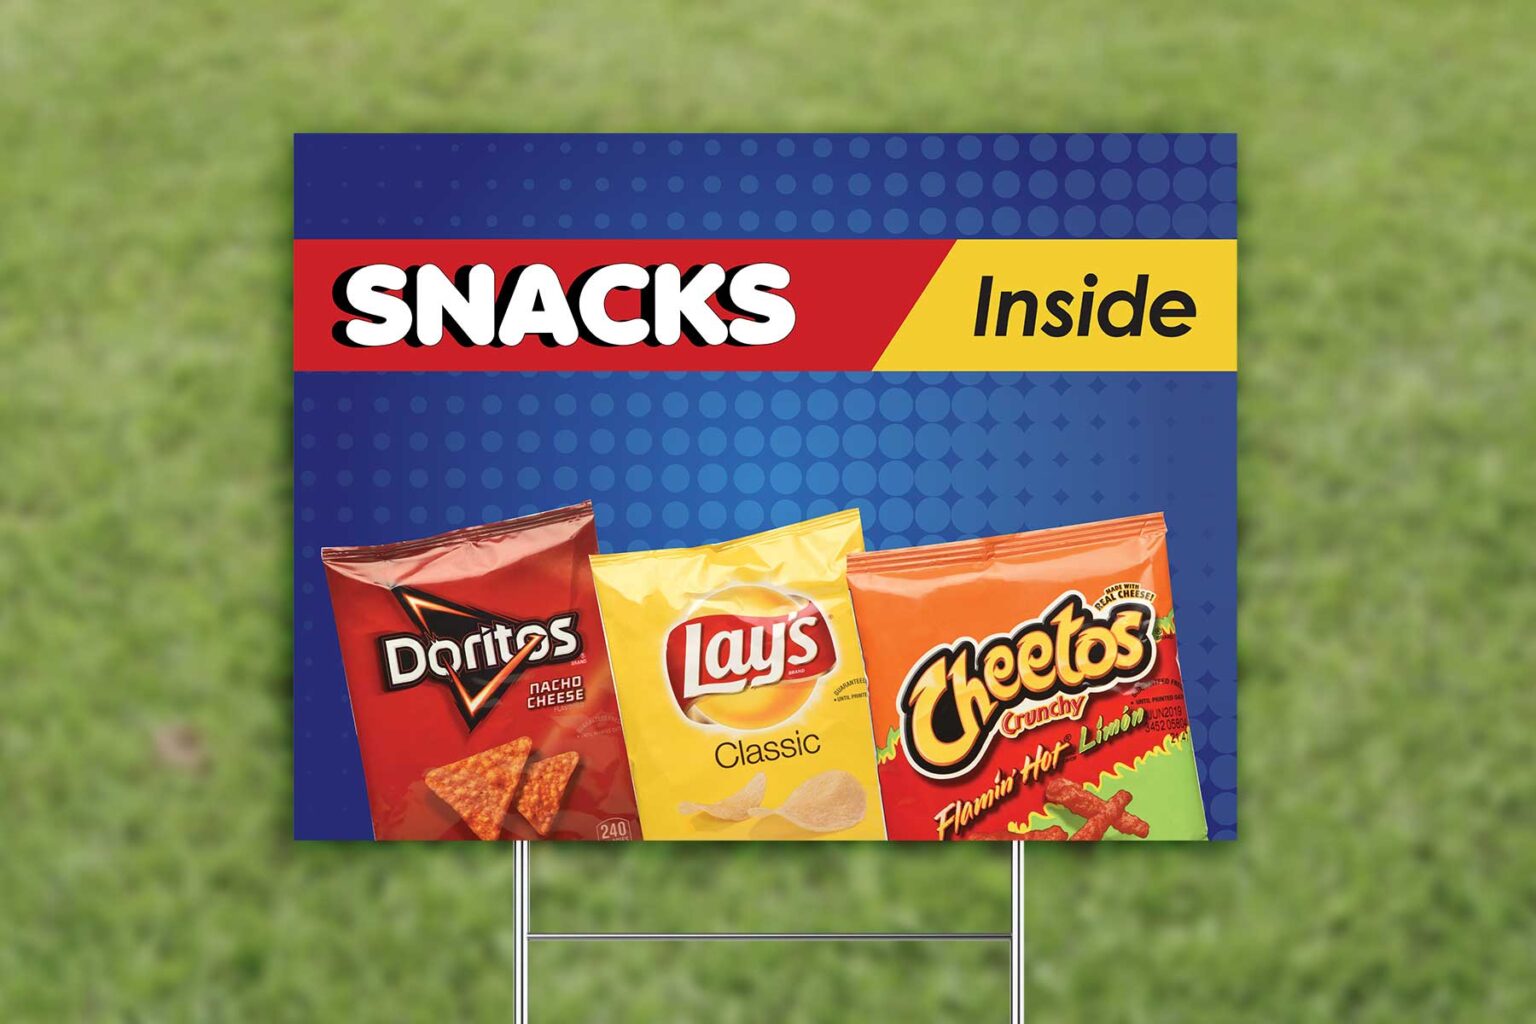 Yard Sign for Grass with Snacks Inside Graphic